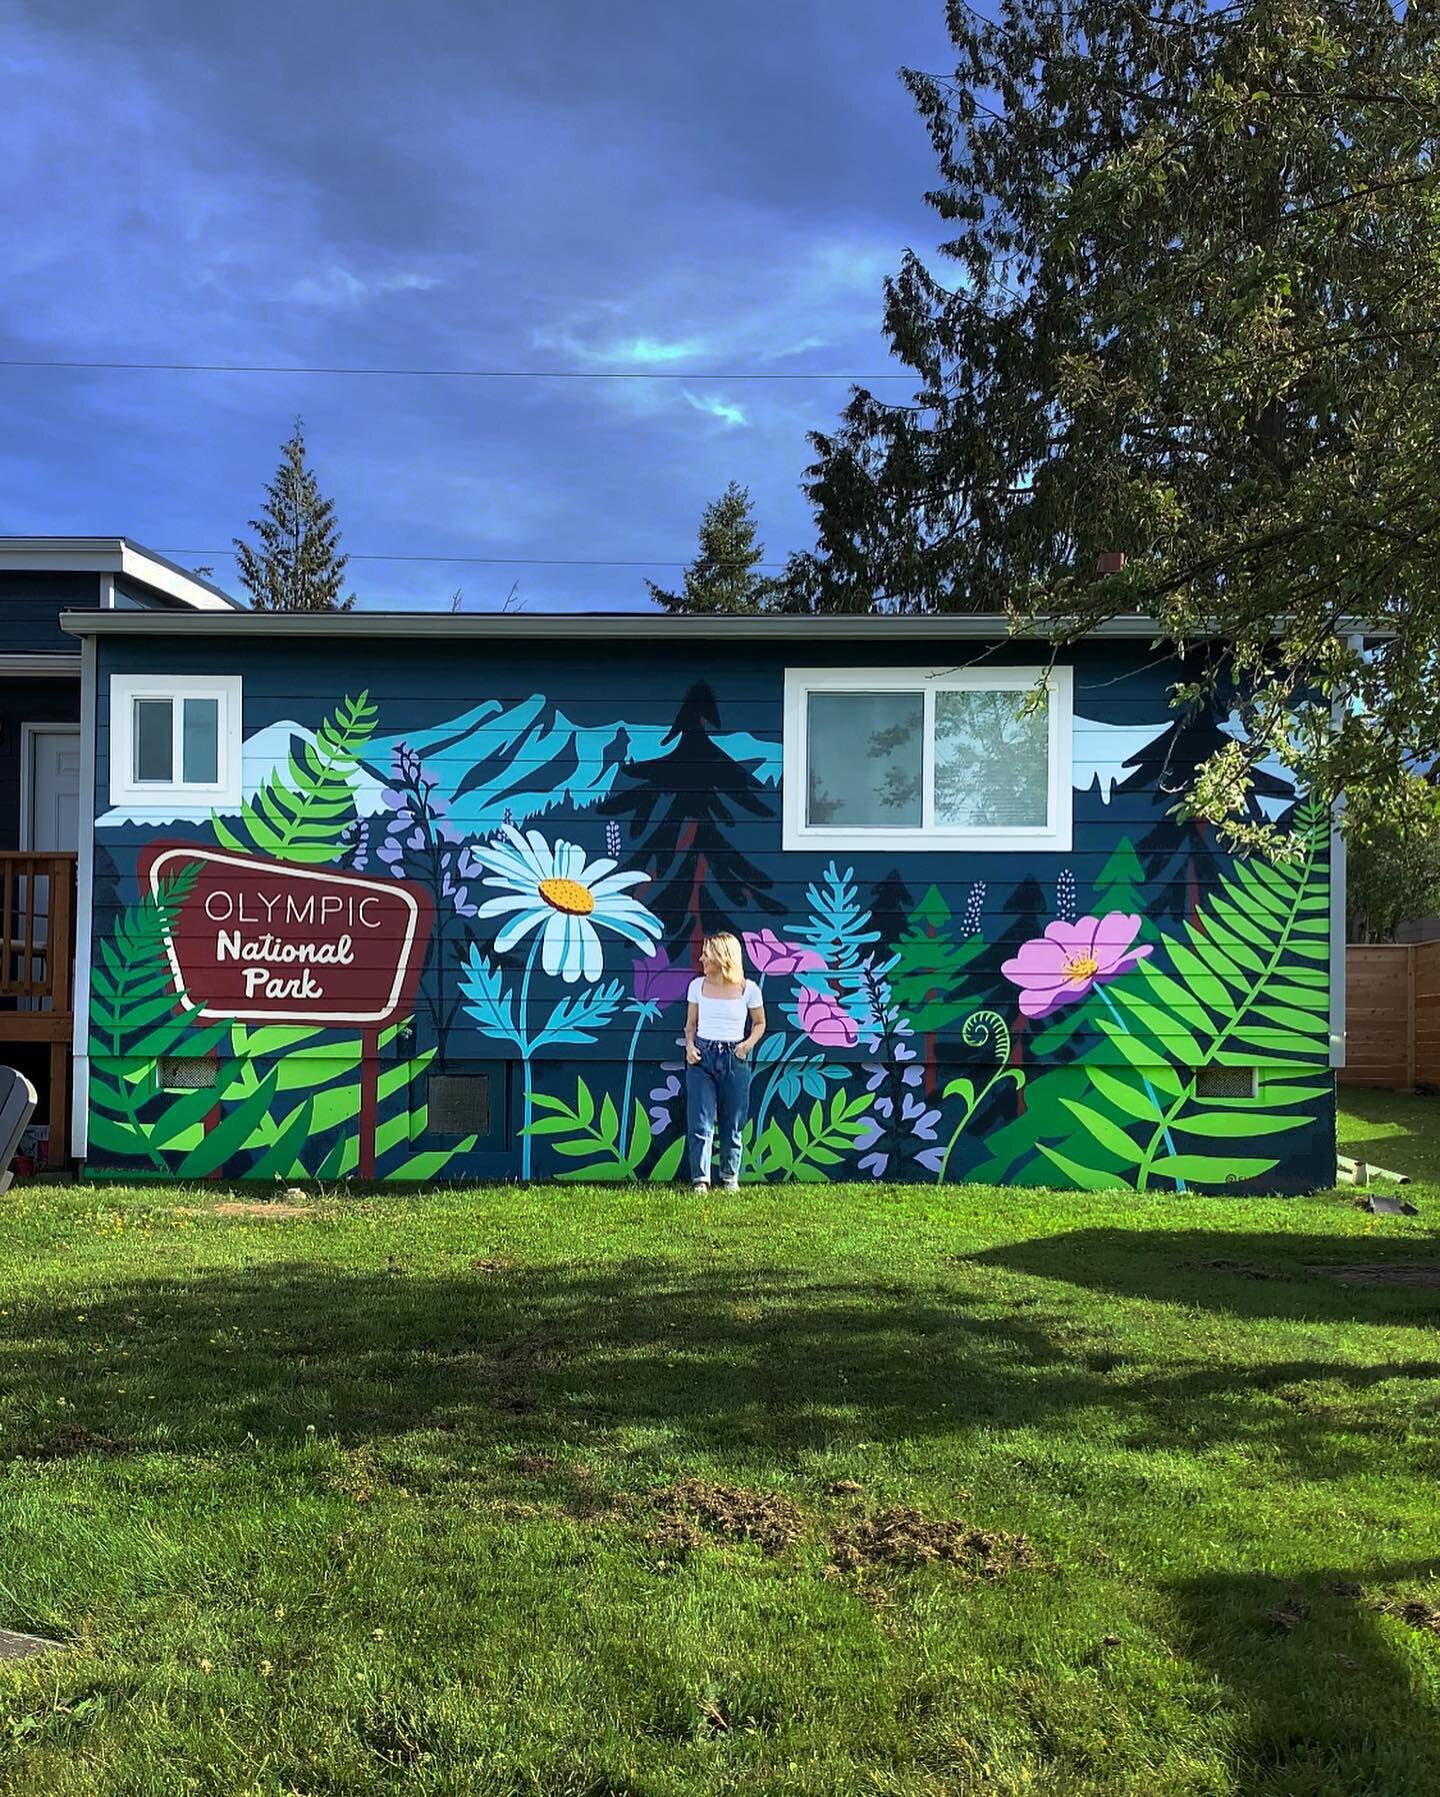 So excited to share the before and after photos of these murals created for an Olympic National Park Airbnb mural!

#beforeandafter #airbnbmural #muralart #muralartist